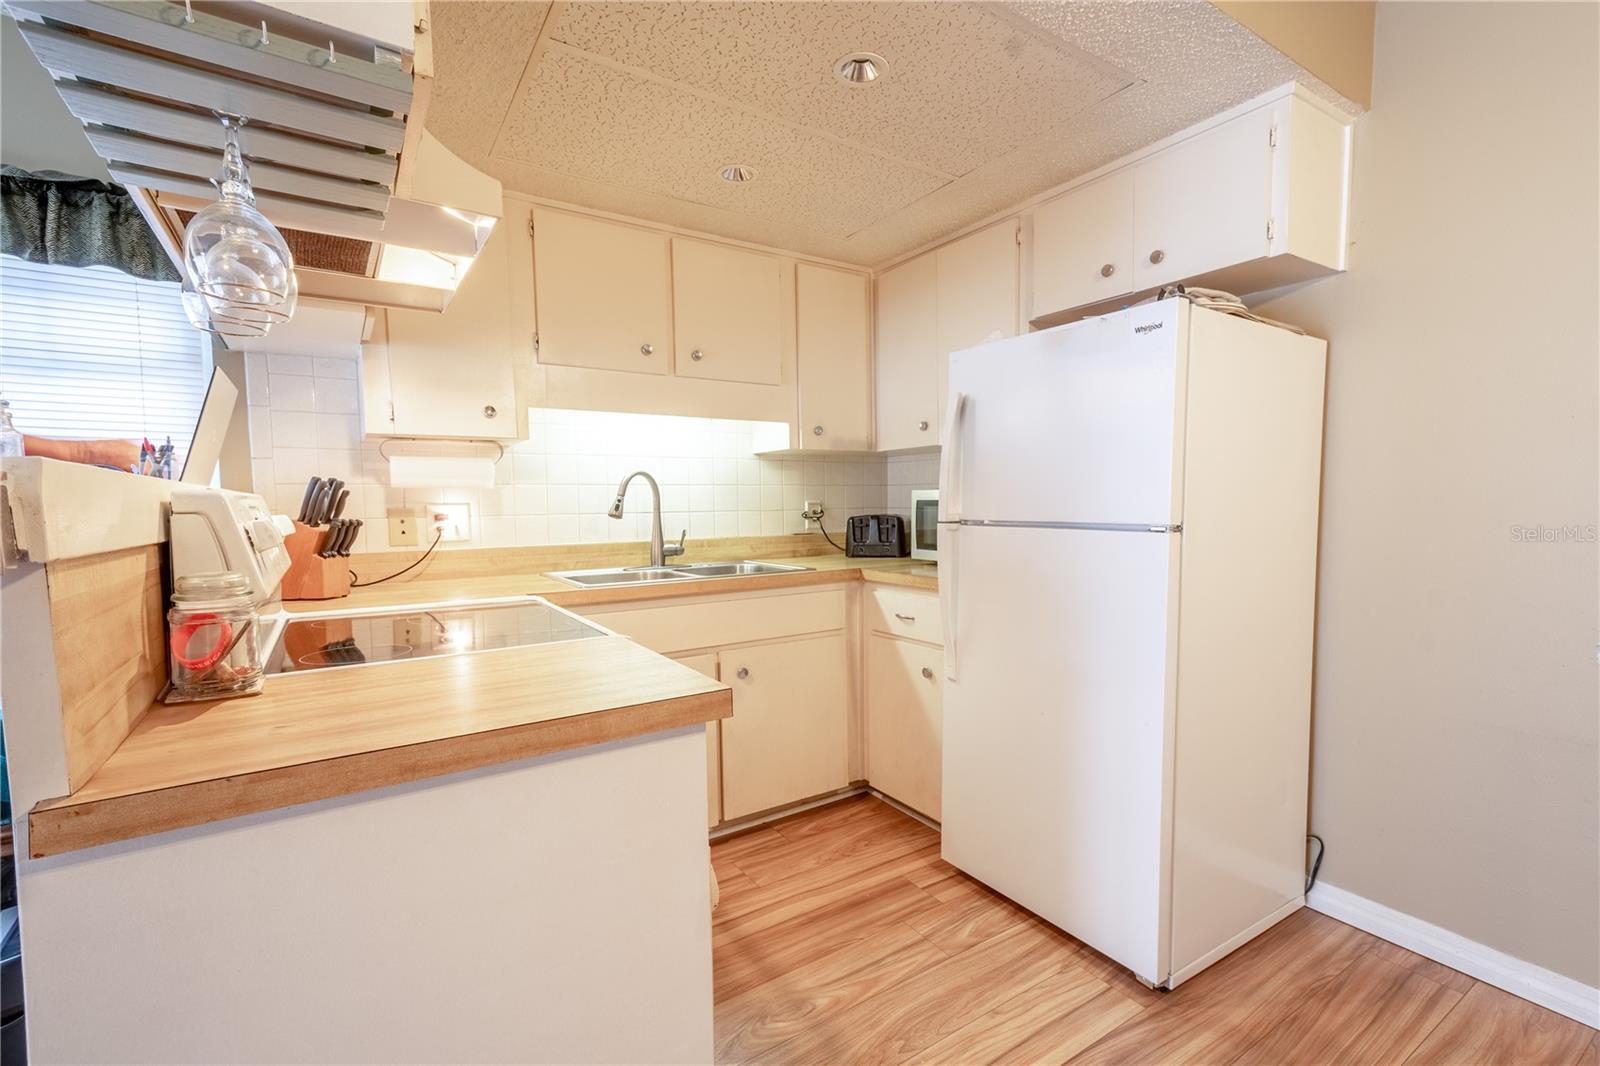 The kitchen is light and inviting, with plenty of cabinet and storage space.